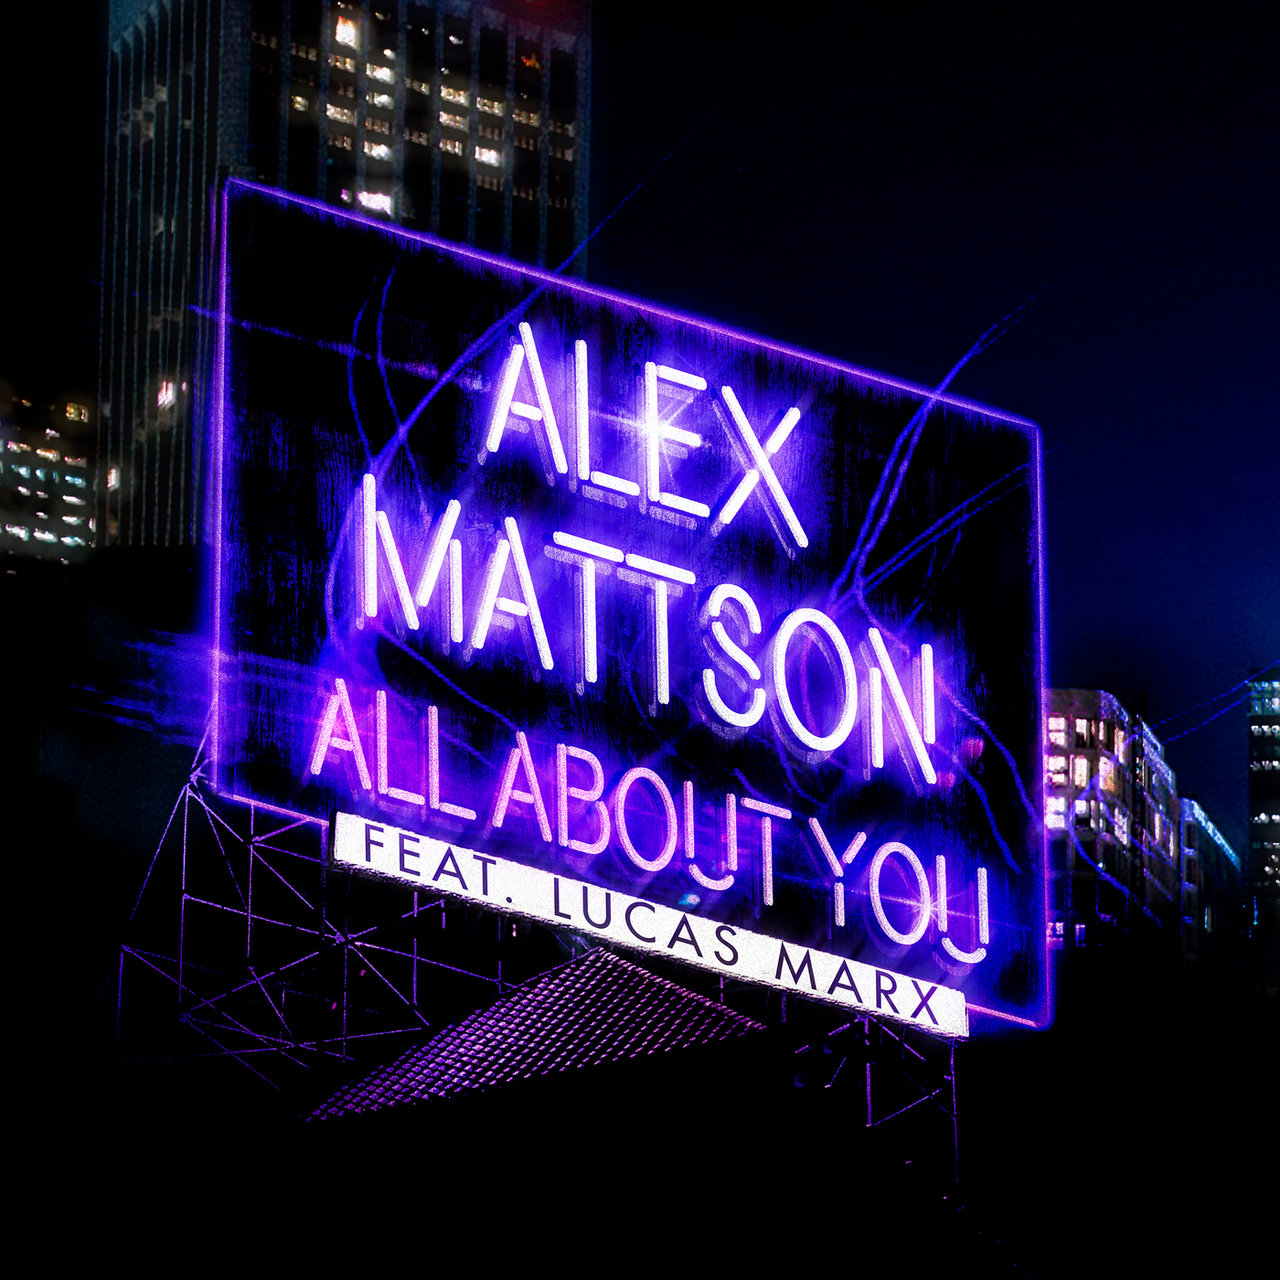 Alex Mattson ft. featuring Lucas Marx All About You cover artwork